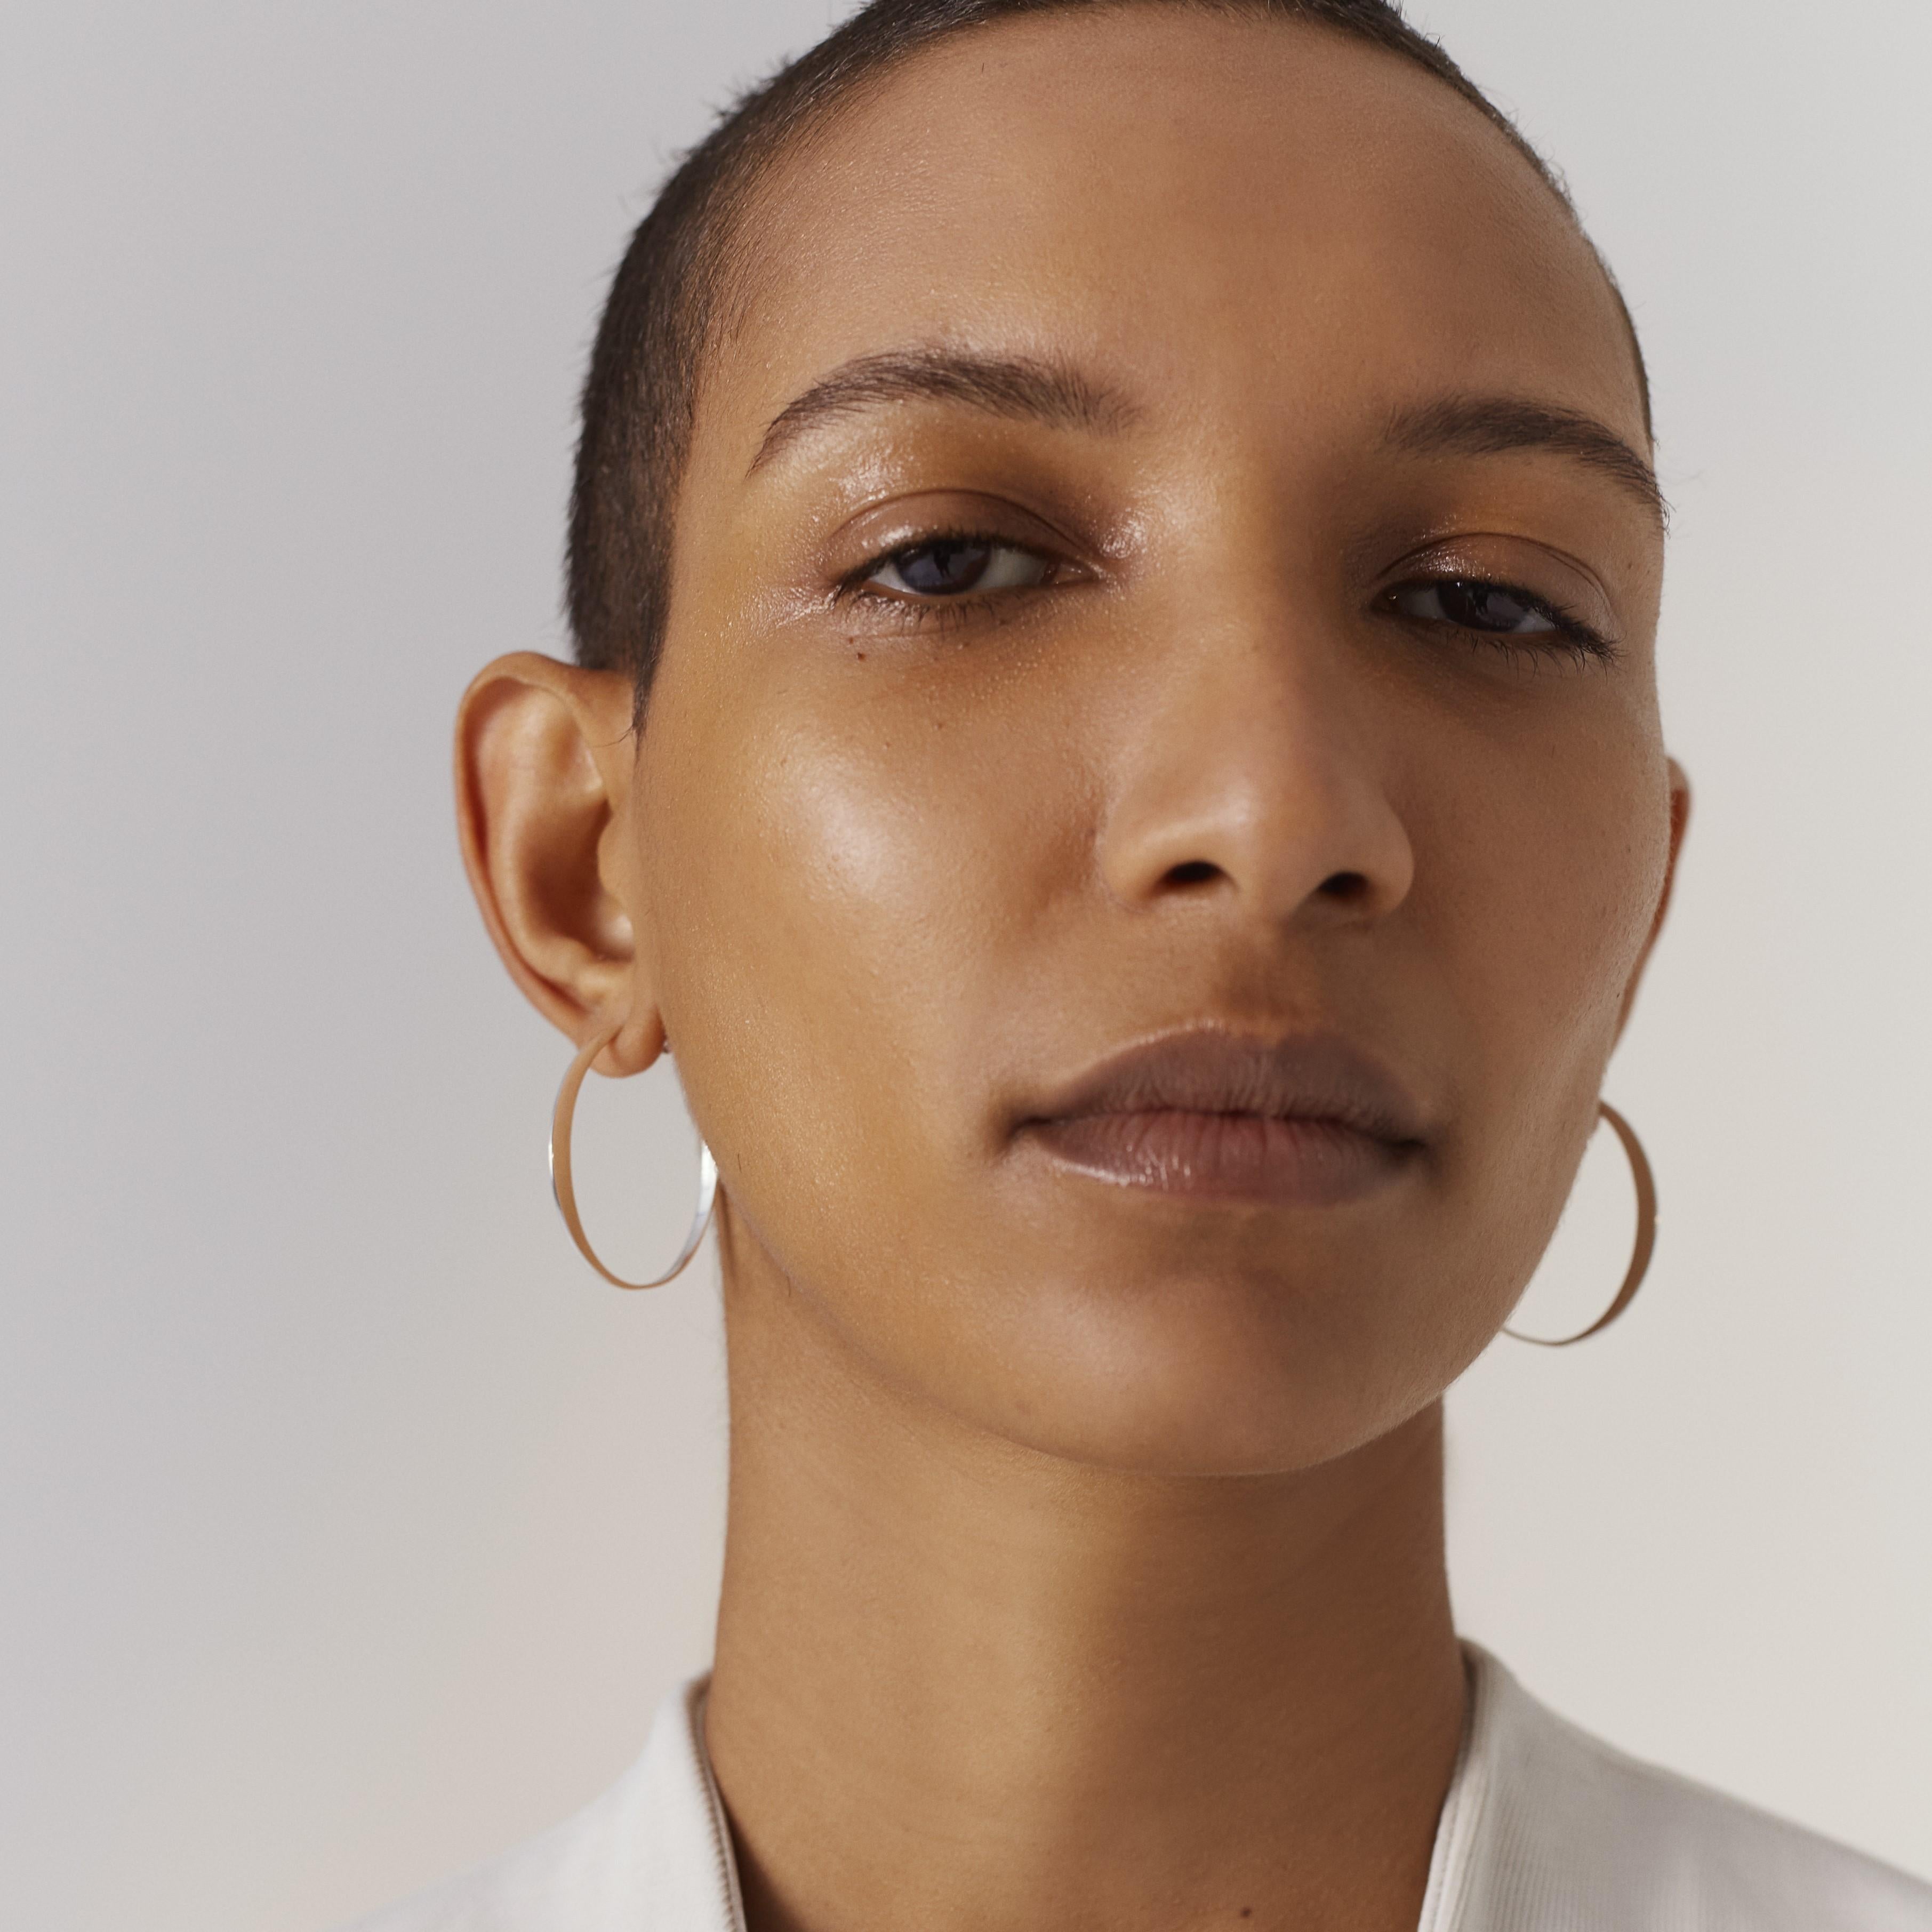 Also available in recycled 18k gold; as one piece earring, or in size small and large.

Introducing the medium GLOW hoop earrings, a stunning piece of Danish design crafted in Copenhagen. This architectural earring is handcrafted using recycled